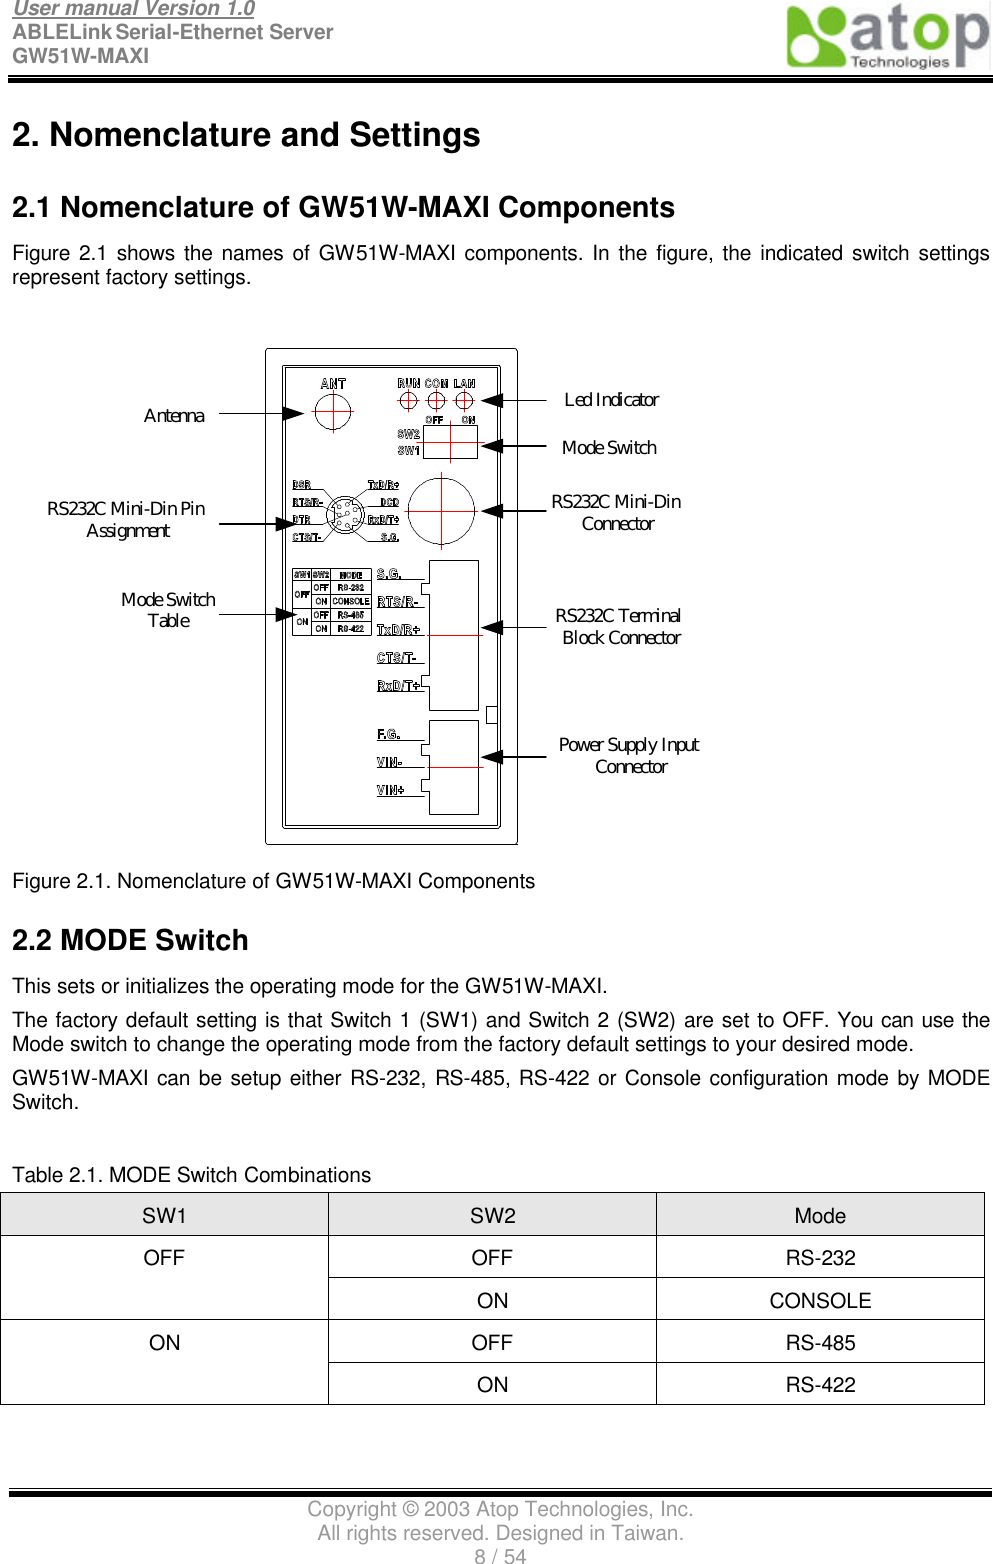 User manual Version 1.0 ABLELink Serial-Ethernet Server   GW51W-MAXI                                                                 Copyright © 2003 Atop Technologies, Inc. All rights reserved. Designed in Taiwan. 8 / 54   2. Nomenclature and Settings 2.1 Nomenclature of GW51W-MAXI Components Figure 2.1 shows the names of GW51W-MAXI components. In the figure, the indicated switch settings represent factory settings. Led IndicatorRS232C Mini-Din ConnectorRS232C Terminal Block ConnectorPower Supply Input ConnectorAntennaRS232C Mini-Din Pin AssignmentMode Switch Table Mode Switch Figure 2.1. Nomenclature of GW51W-MAXI Components 2.2 MODE Switch This sets or initializes the operating mode for the GW51W-MAXI. The factory default setting is that Switch 1 (SW1) and Switch 2 (SW2) are set to OFF. You can use the Mode switch to change the operating mode from the factory default settings to your desired mode. GW51W-MAXI can be setup either RS-232, RS-485, RS-422 or Console configuration mode by MODE Switch.  Table 2.1. MODE Switch Combinations SW1 SW2 Mode OFF RS-232 OFF ON CONSOLE OFF RS-485 ON ON RS-422 